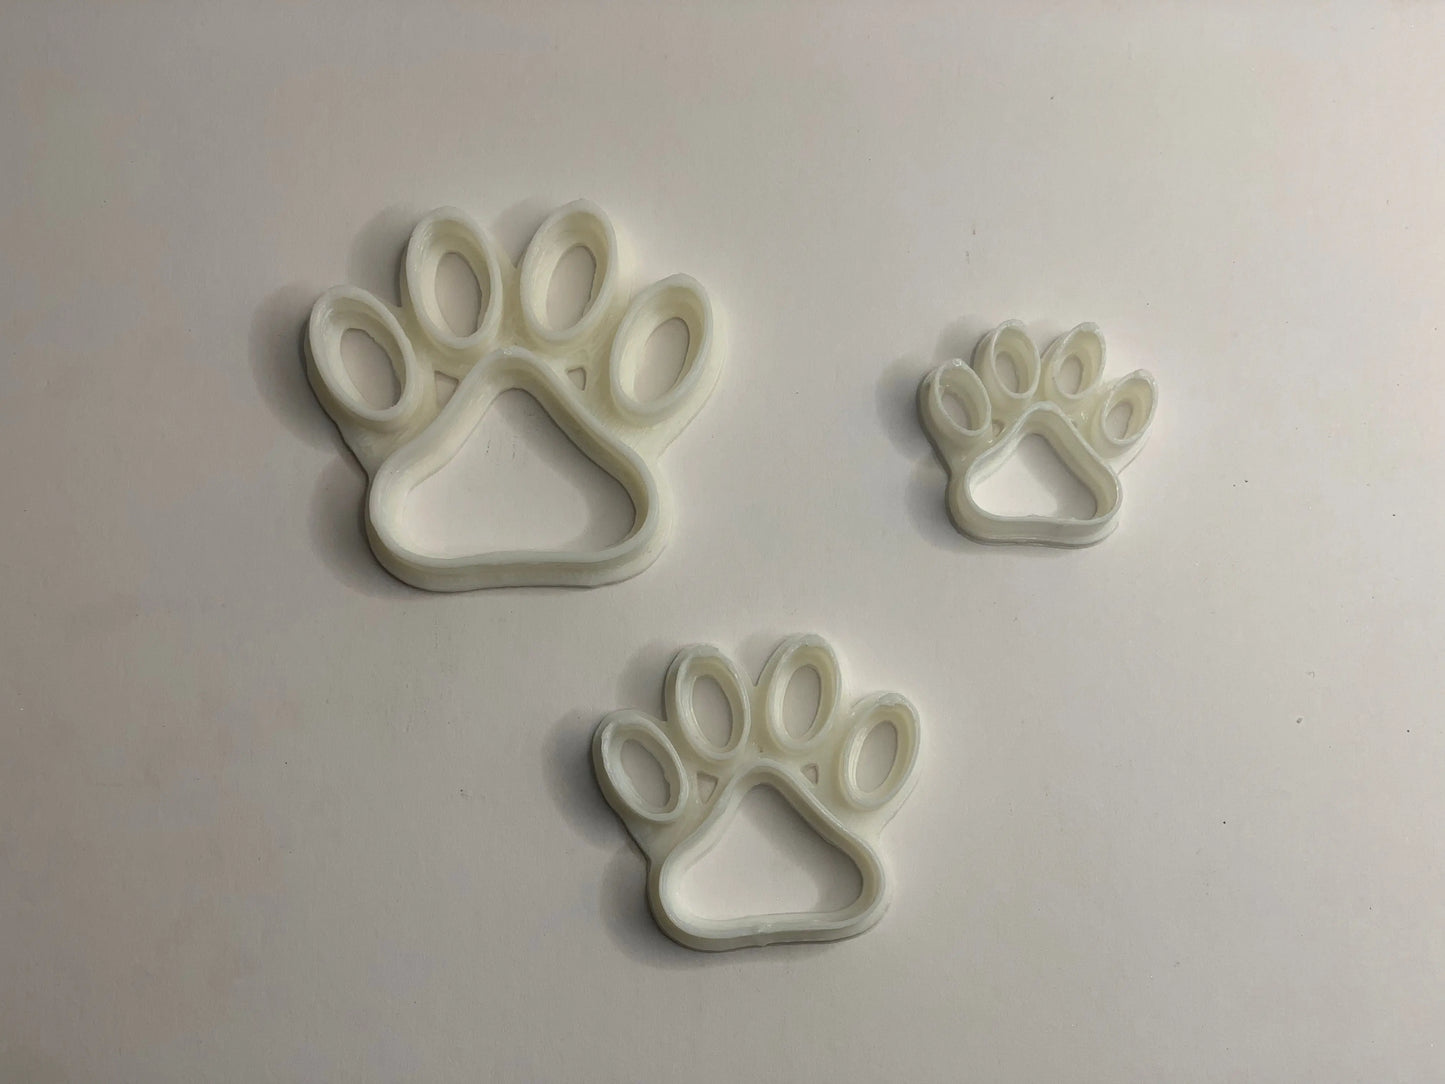 Paw print Cookie Cutter 3 size MEG cookie cutters